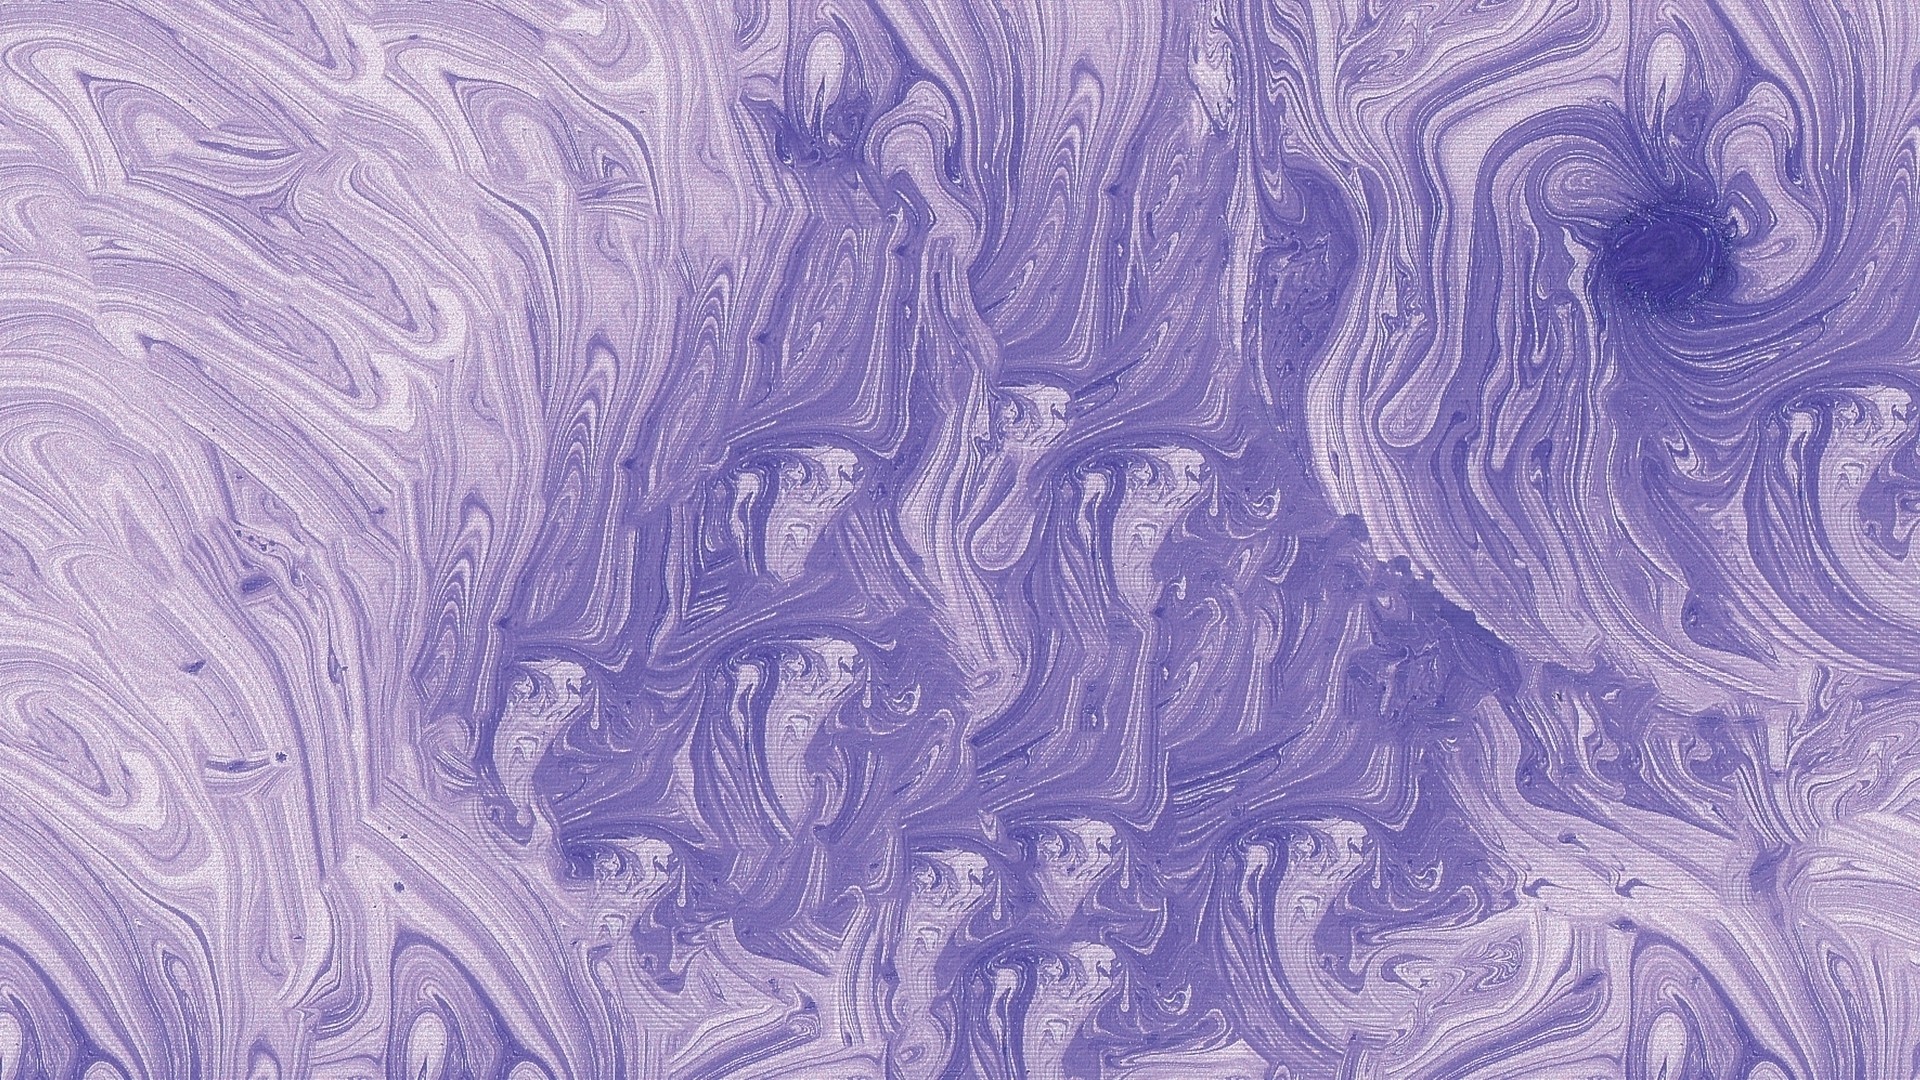 General 1920x1080 violet ink photoshopped painting texture